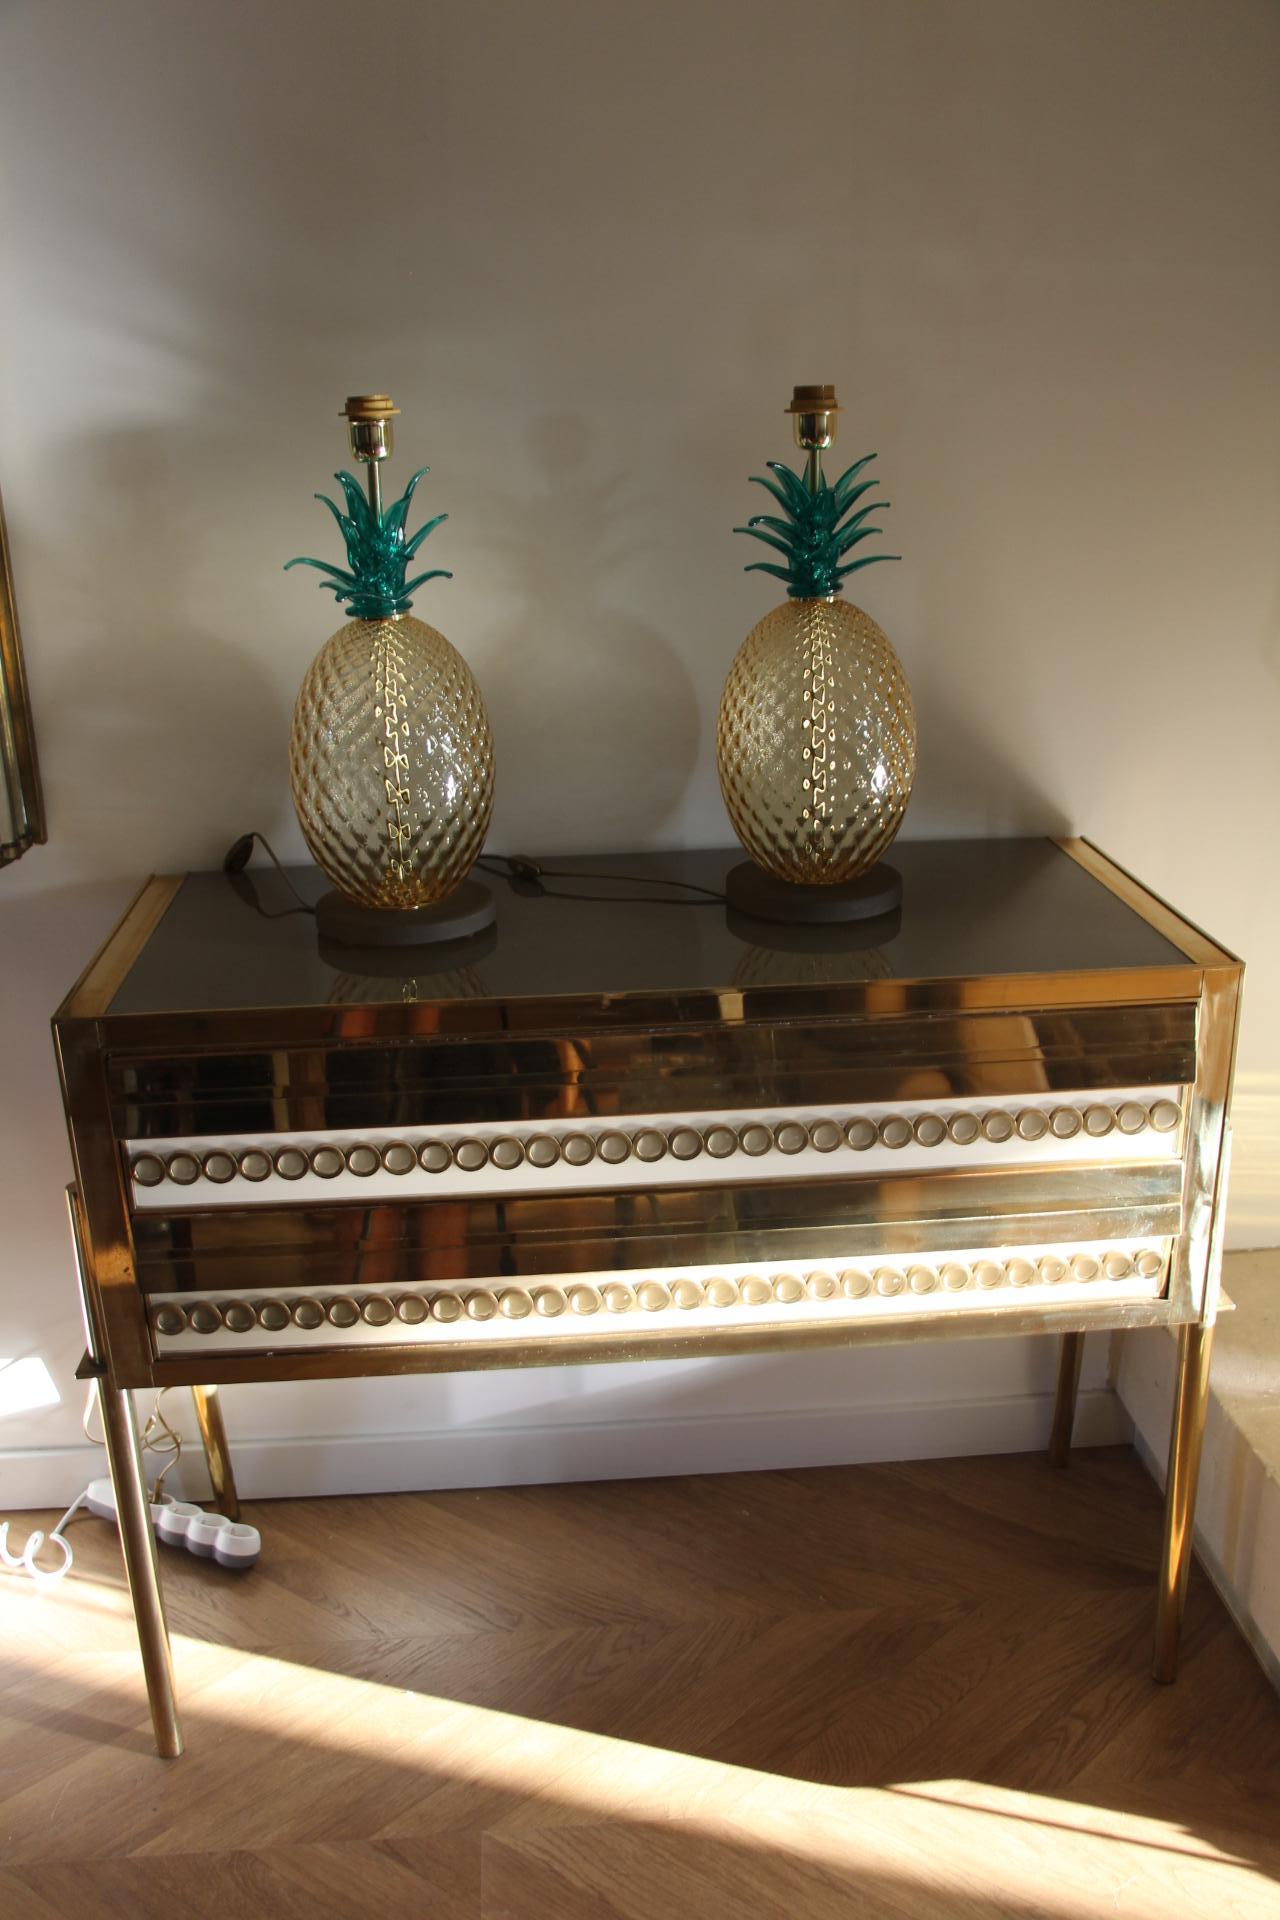 Pair of Pineapple Table Lamps in Emerald Green and Amber Color Murano Glass For Sale 6